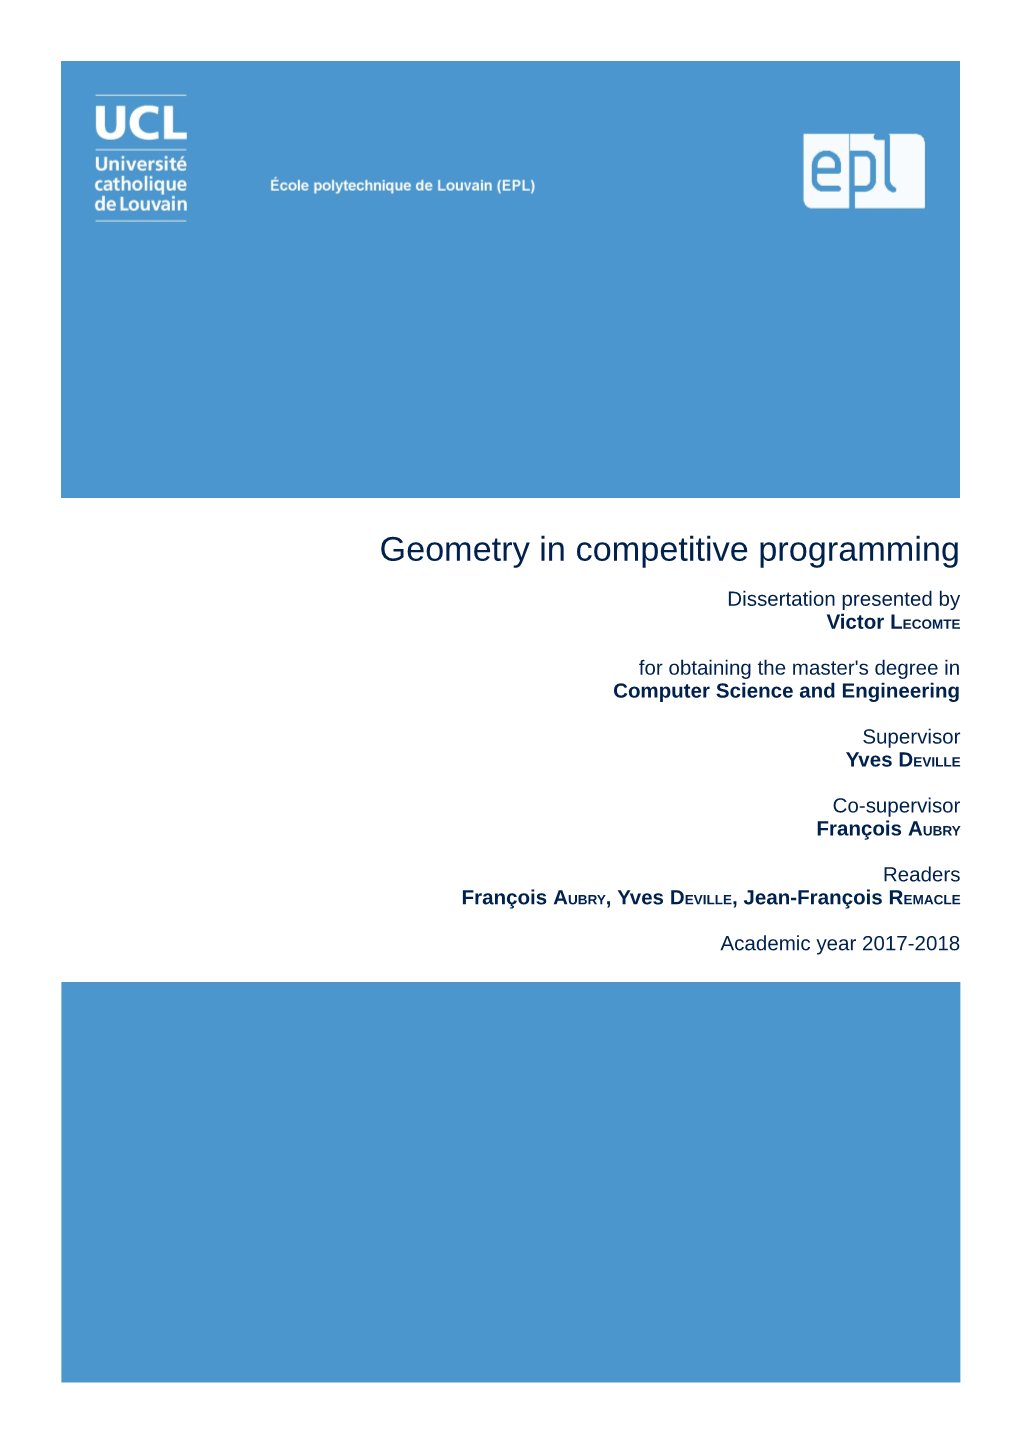 Geometry in Competitive Programming